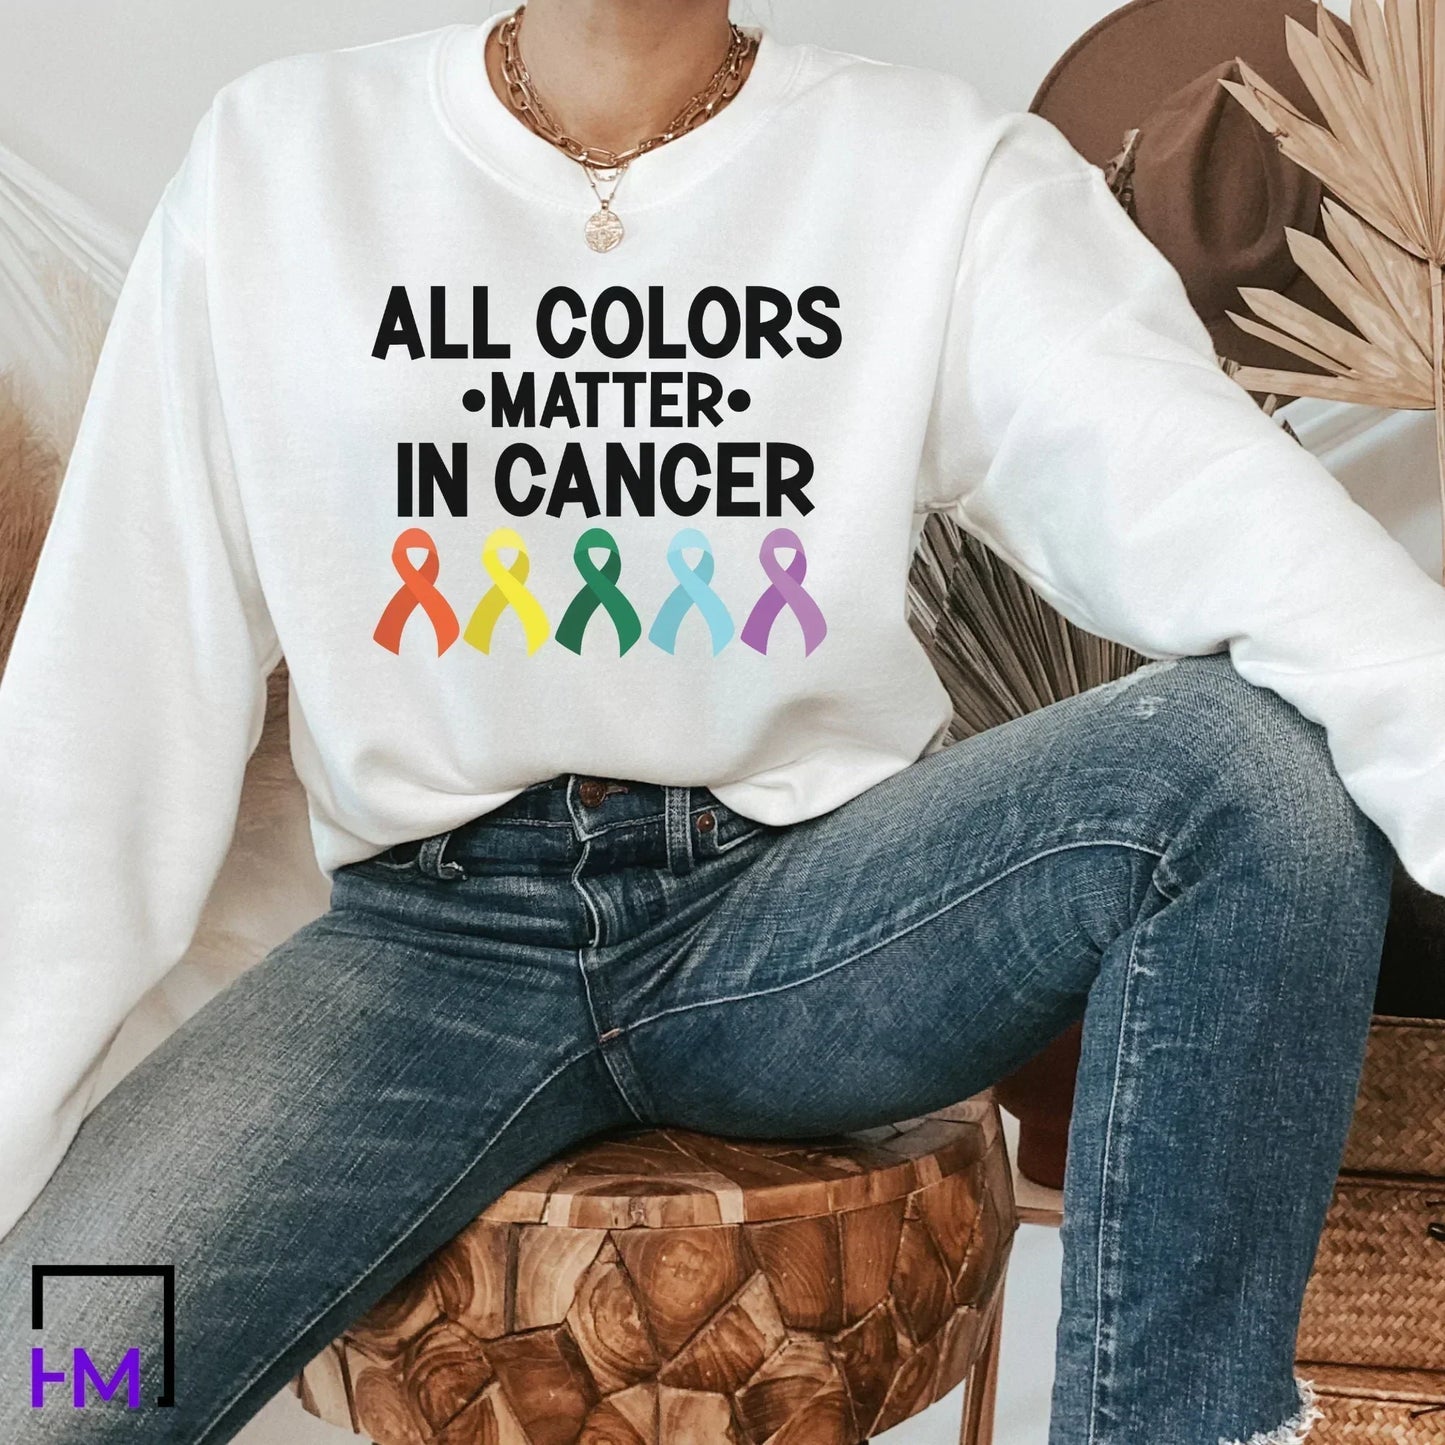 Fight Cancer in Every Color T-shirt, Colorful Cancer Awareness Gift, Cancer Ribbon Tee, Rainbow Ribbon Sweater, Cancer Support Sweatshirt HMDesignStudioUS